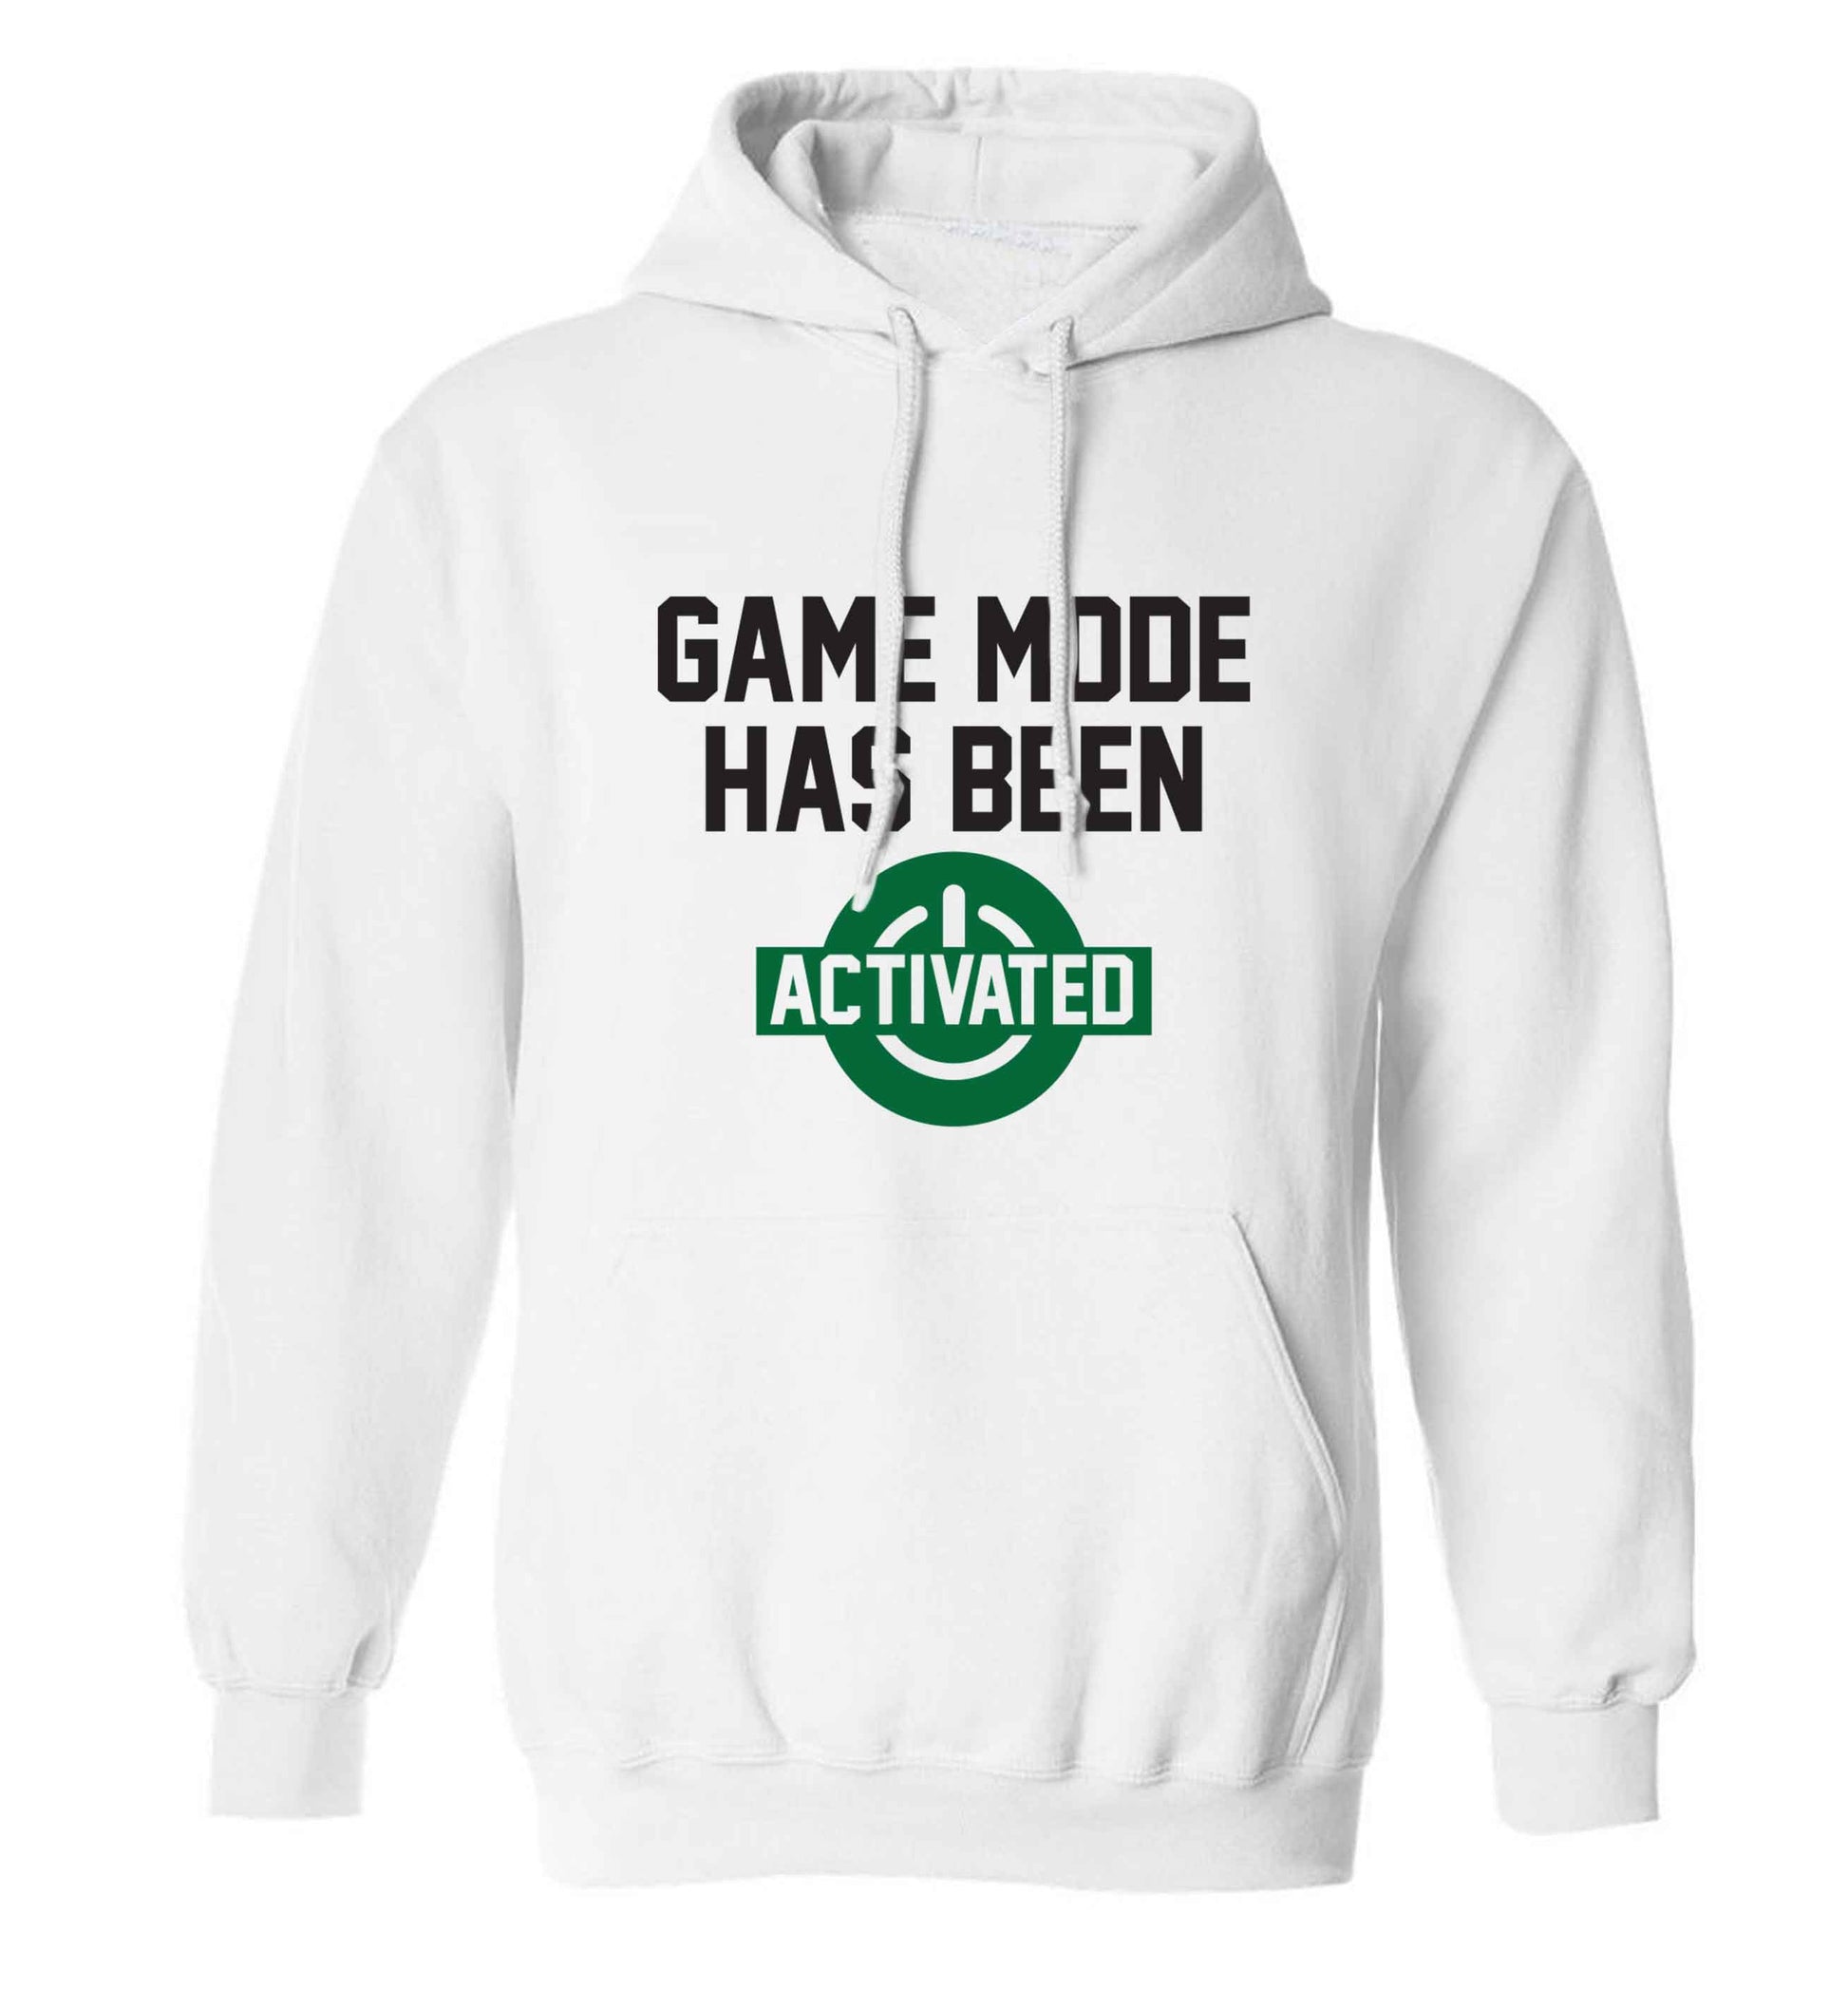 Game mode has been activated adults unisex white hoodie 2XL